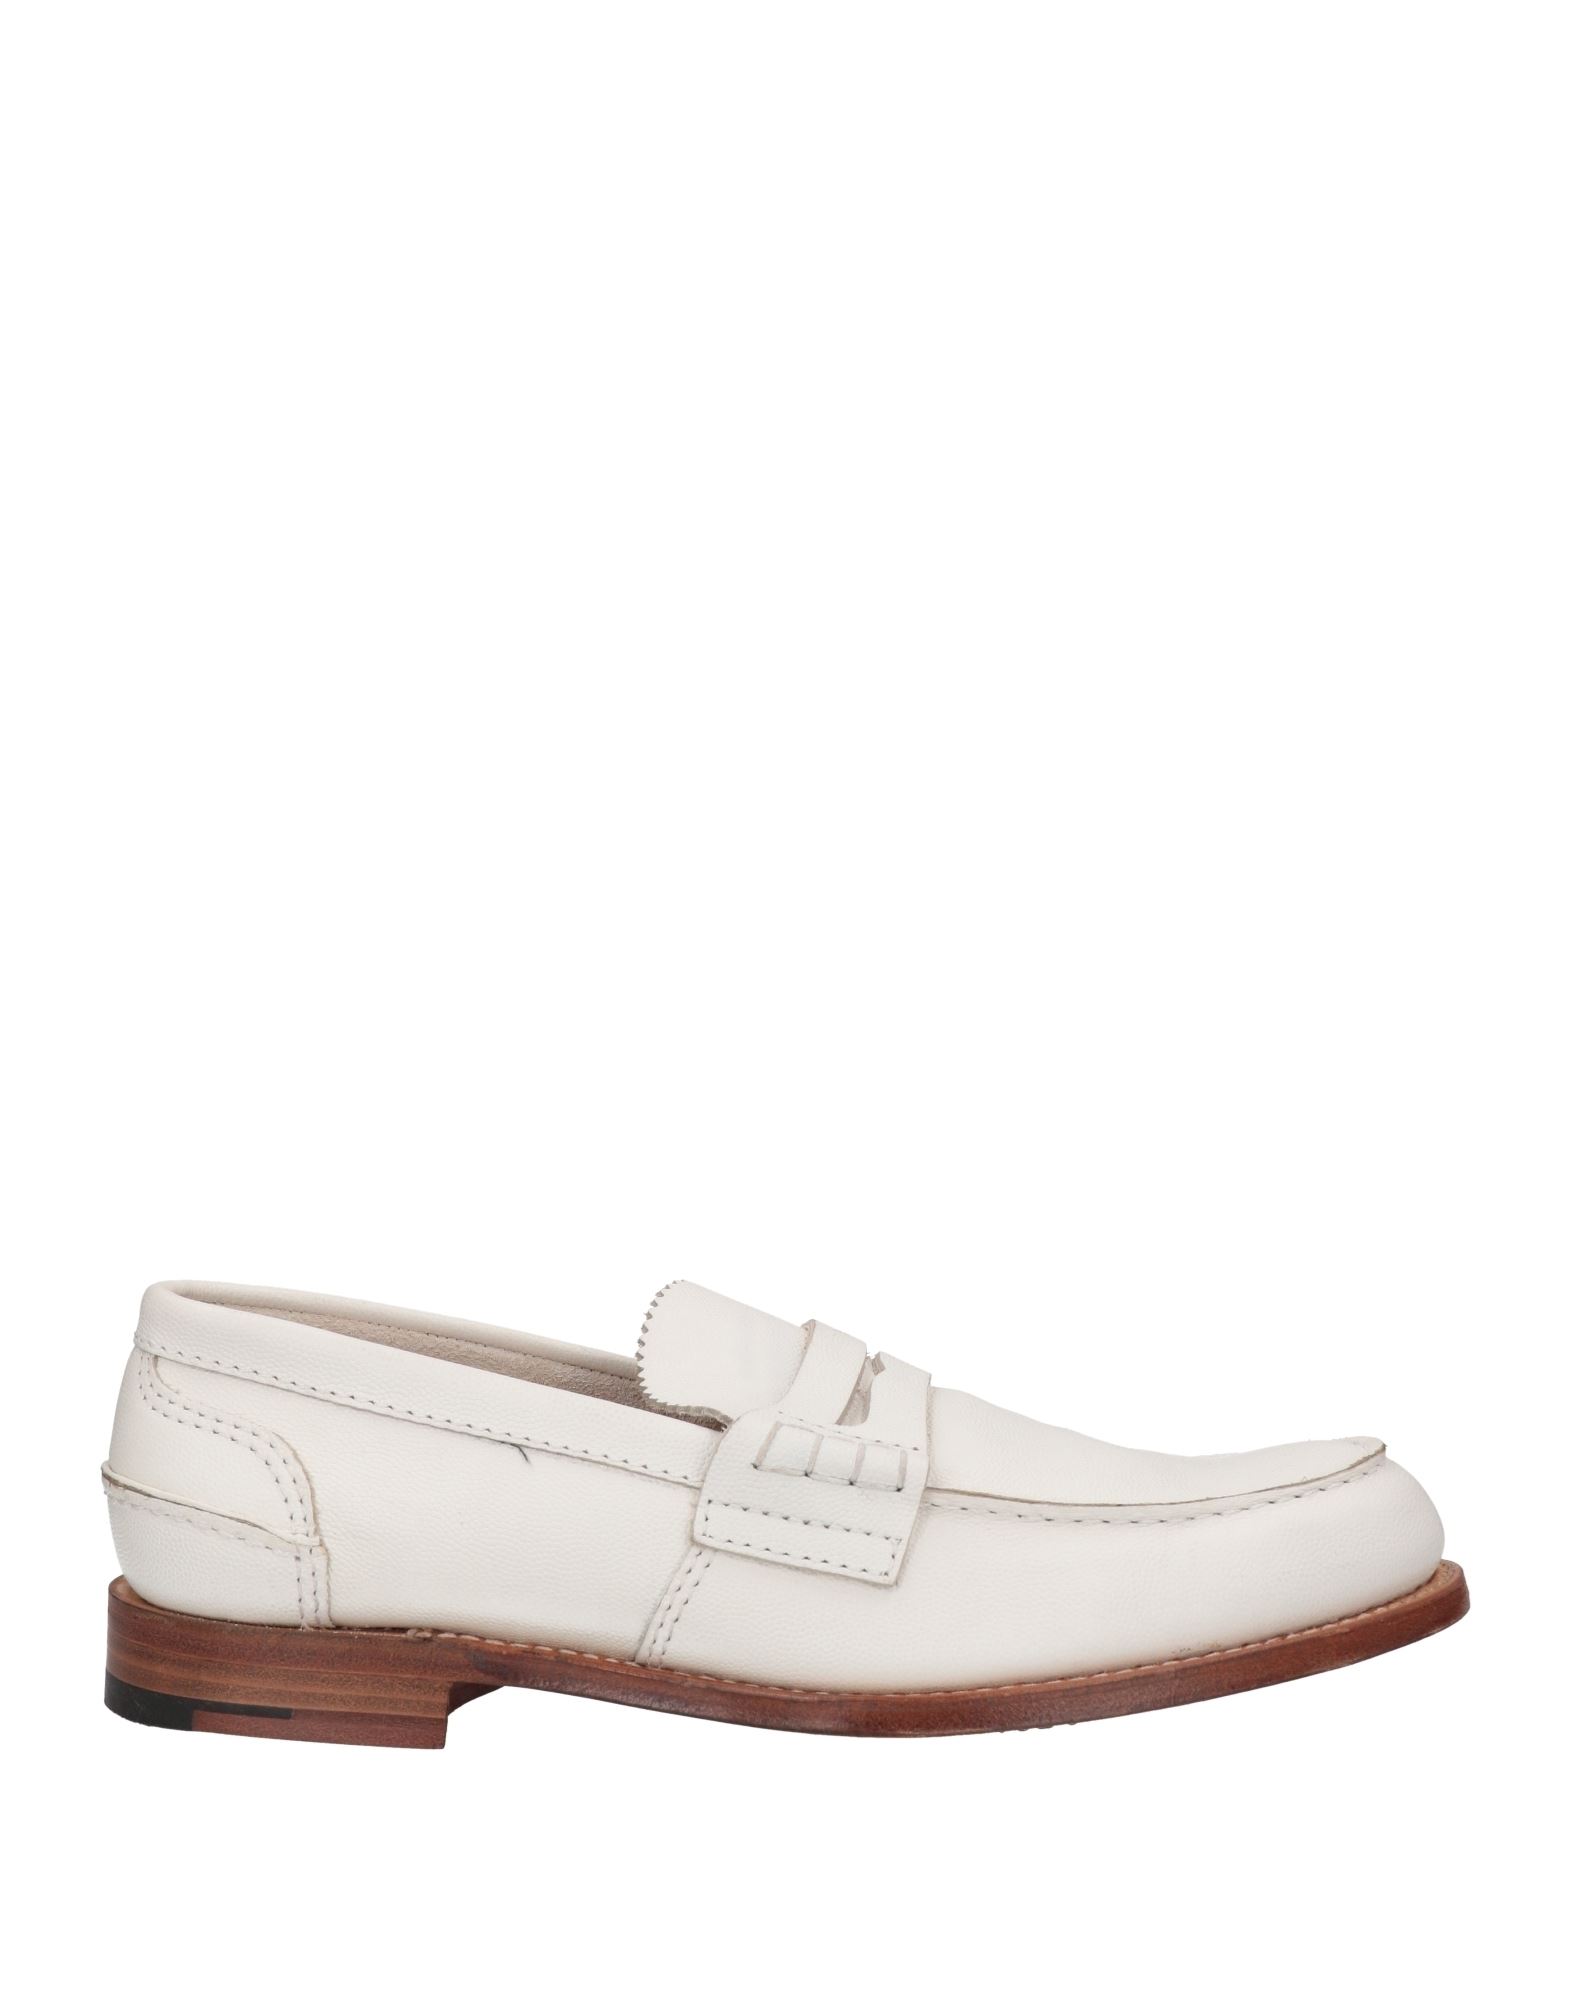 Church's Man Loafers White Size 10.5 Soft Leather